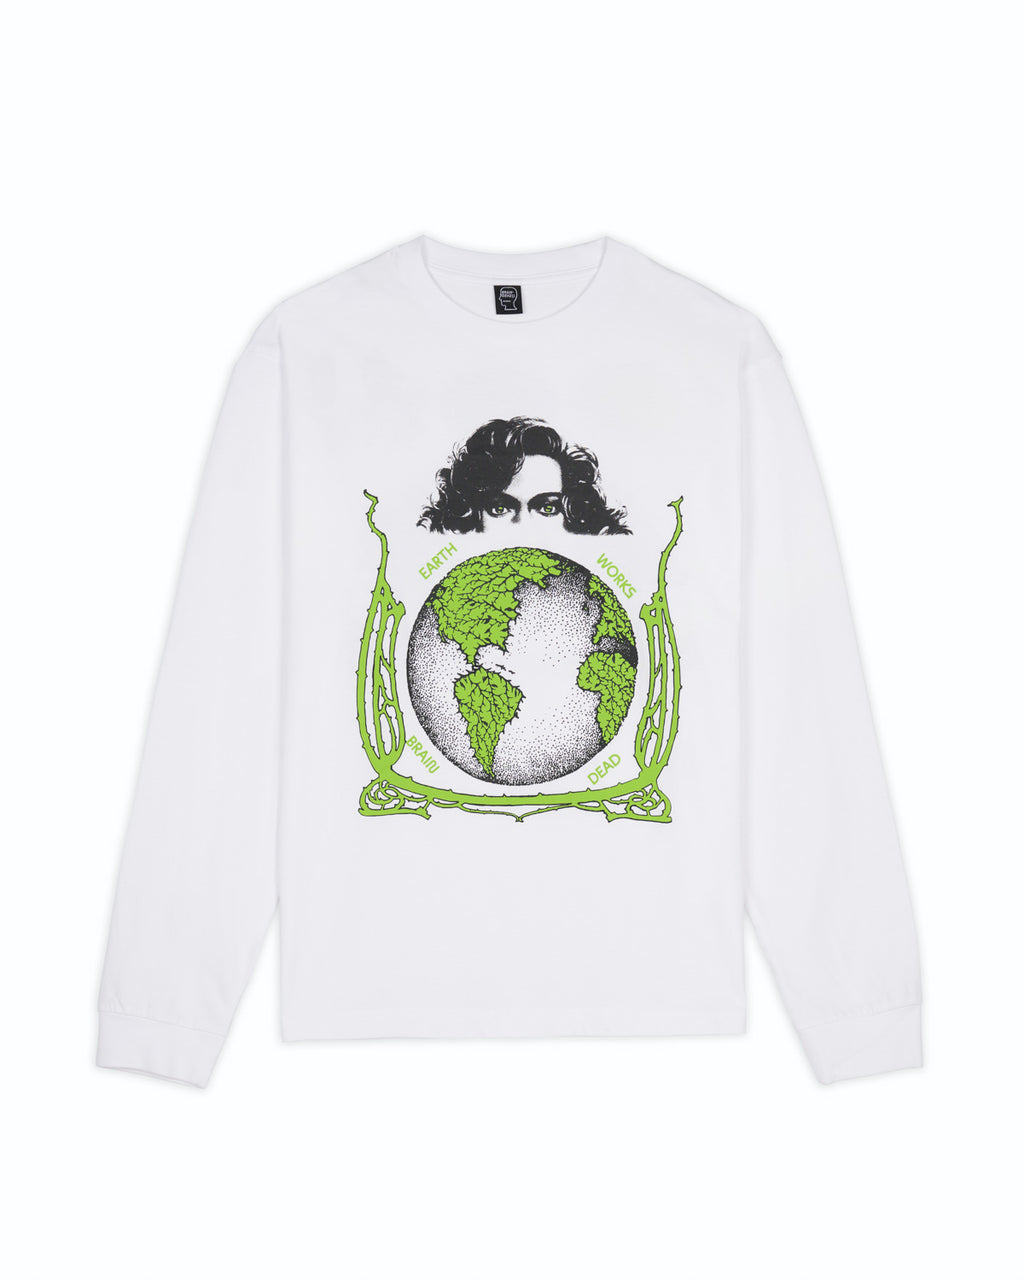 Conspiracy L/S Tee, White